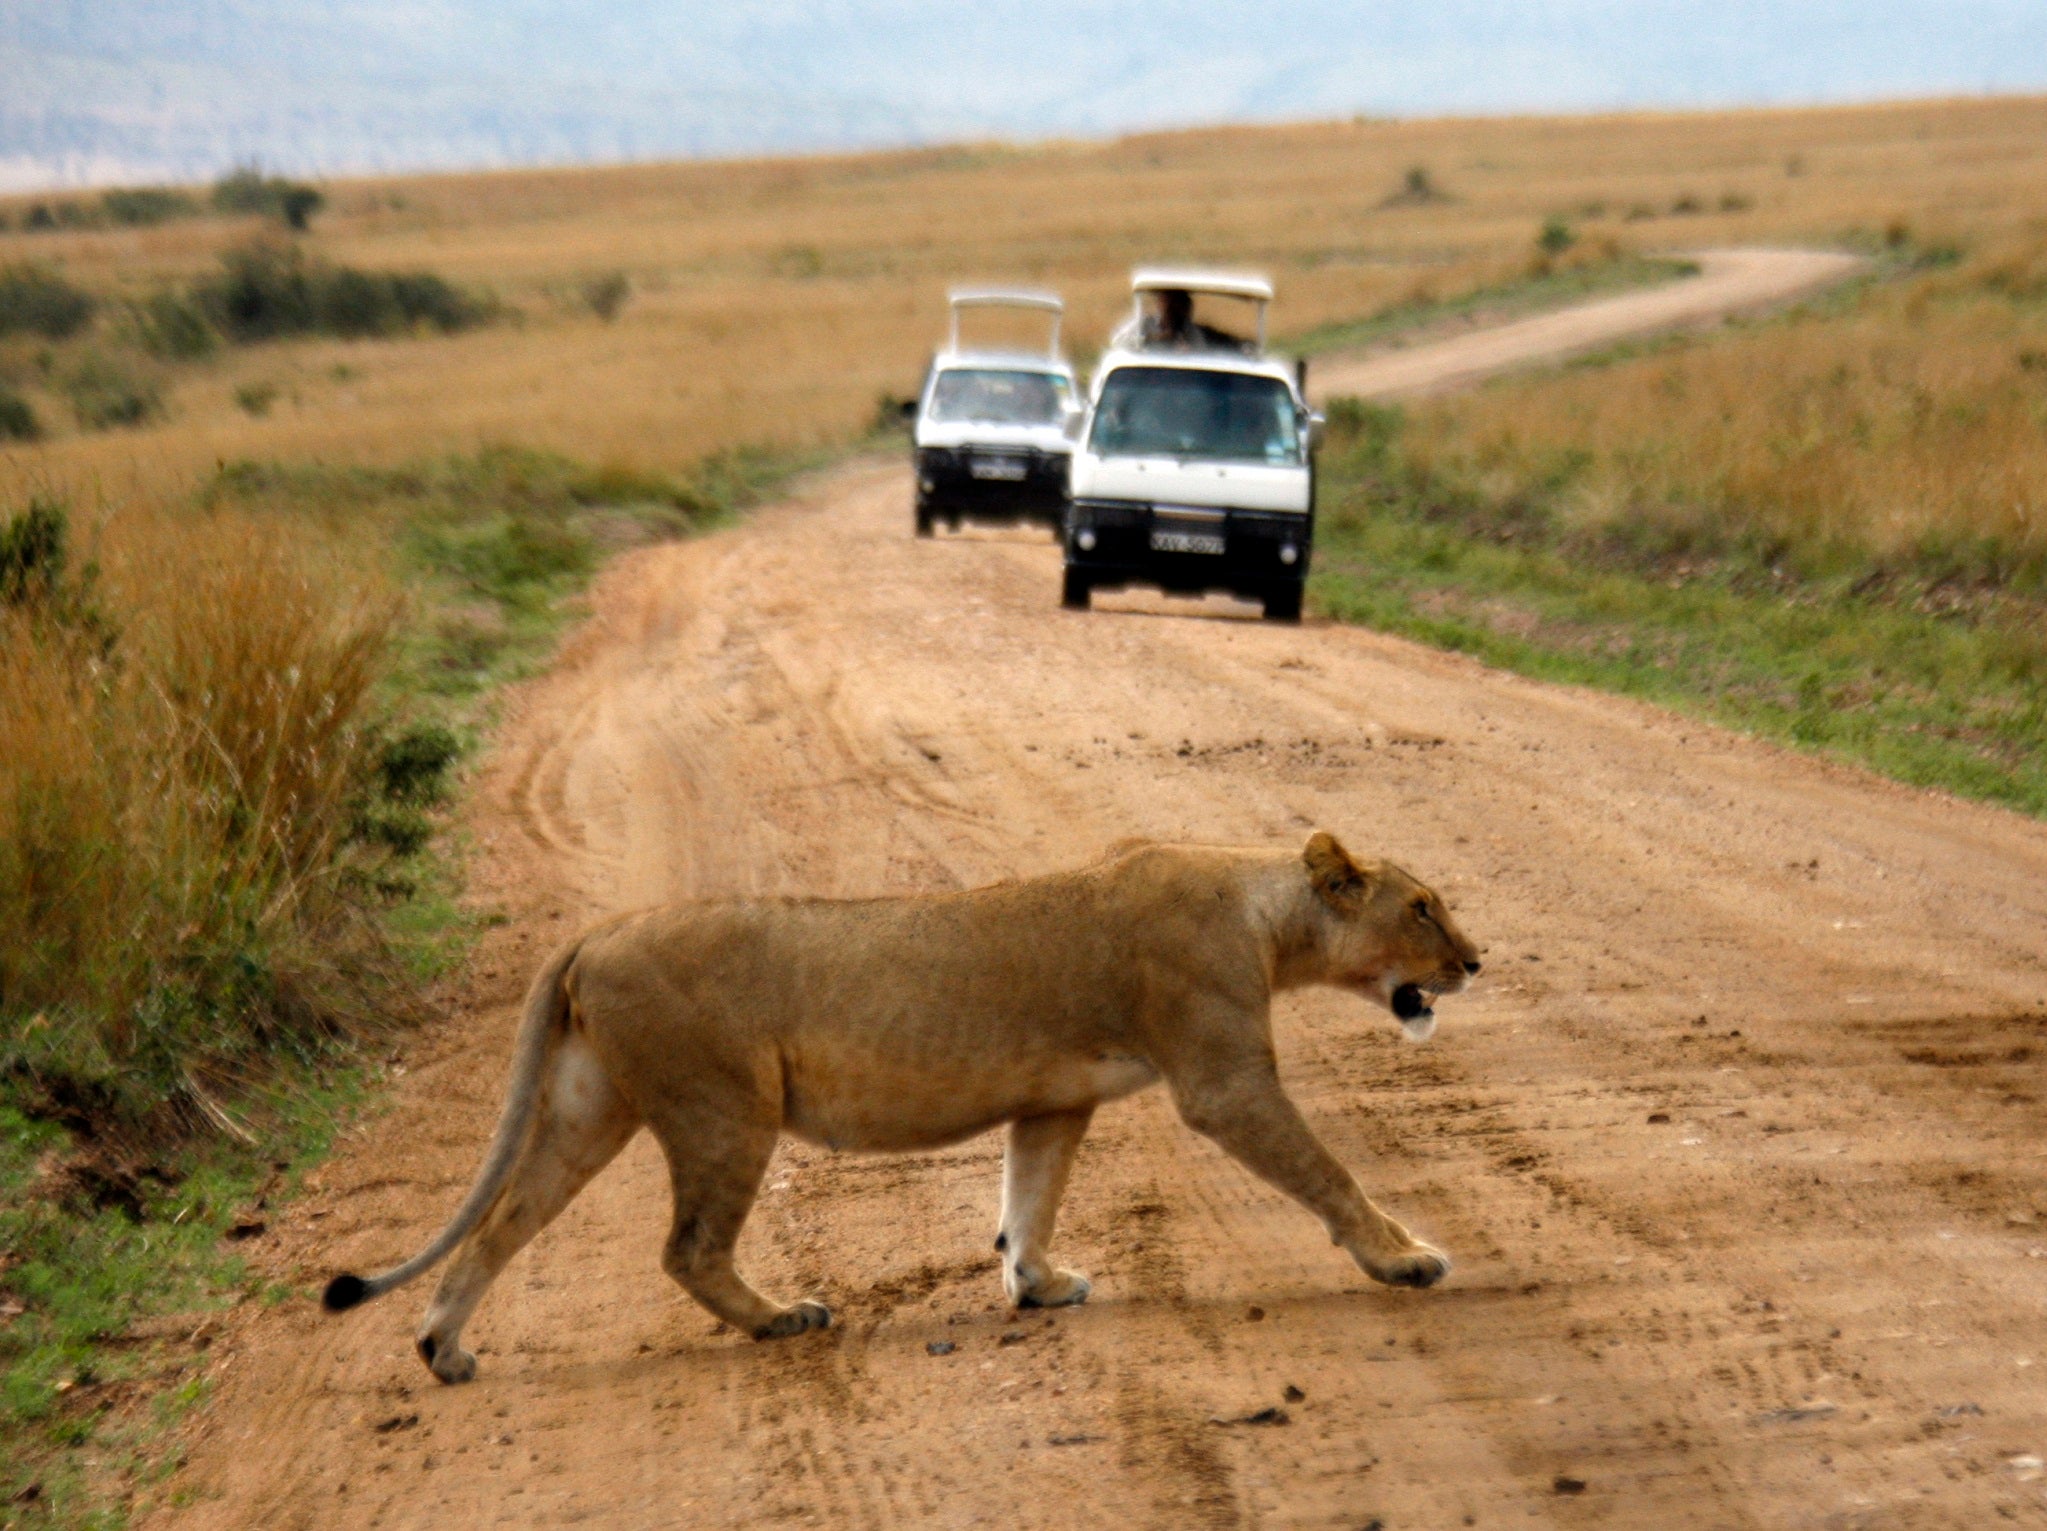 Reports of fatal lion attacks on humans are not uncommon in remote areas of rural Zimbabwe